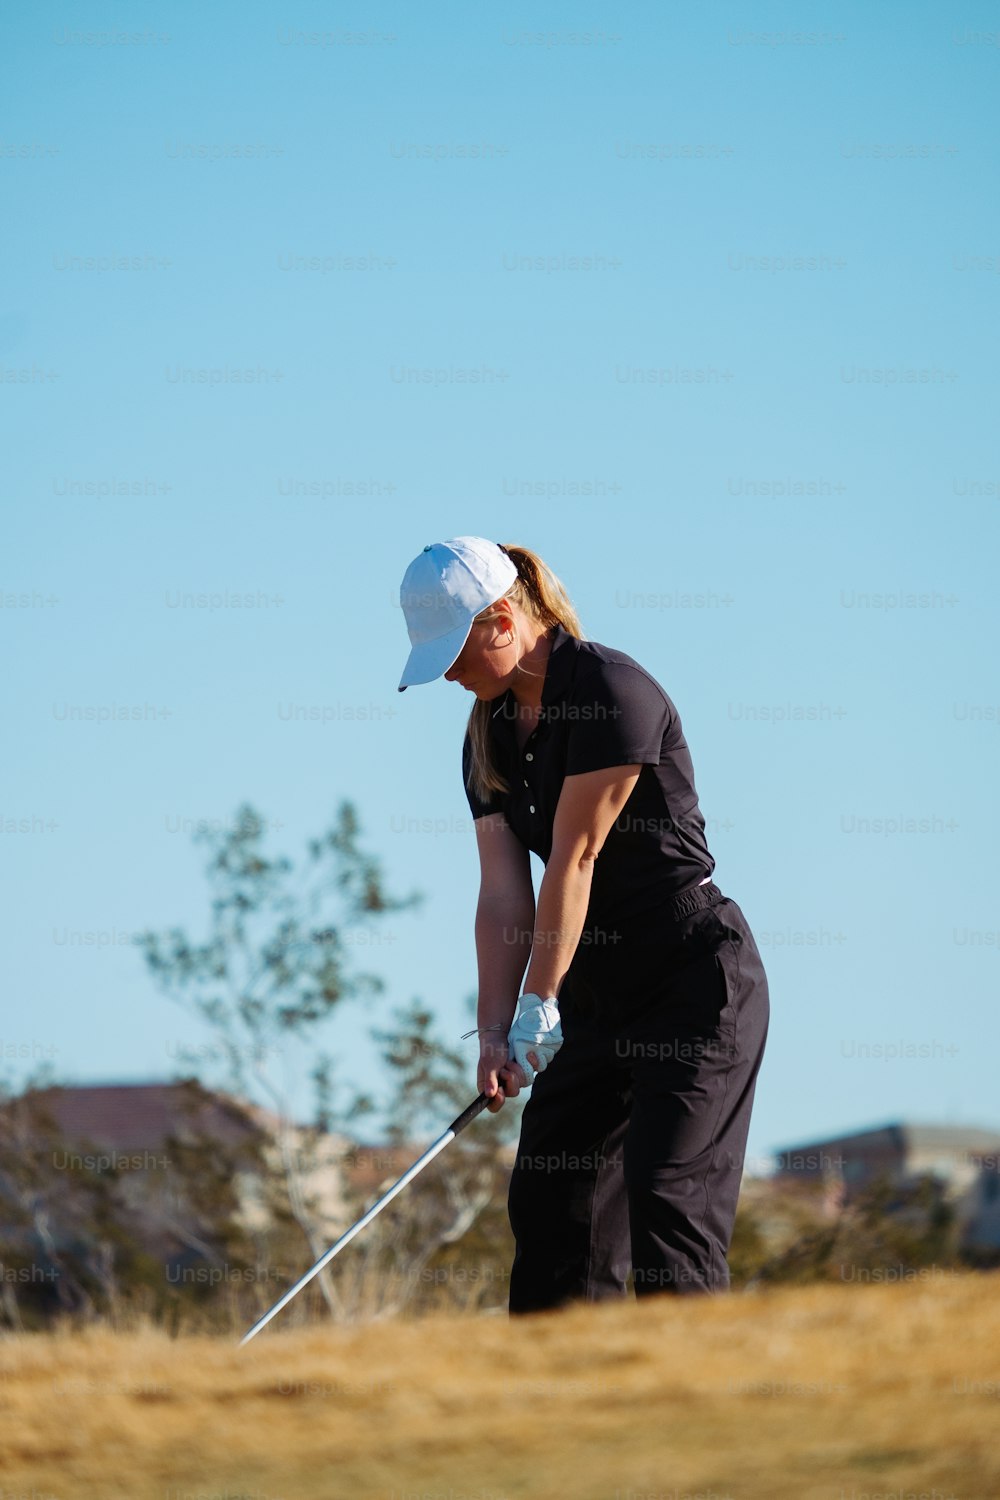 a woman in black shirt and white hat playing golf